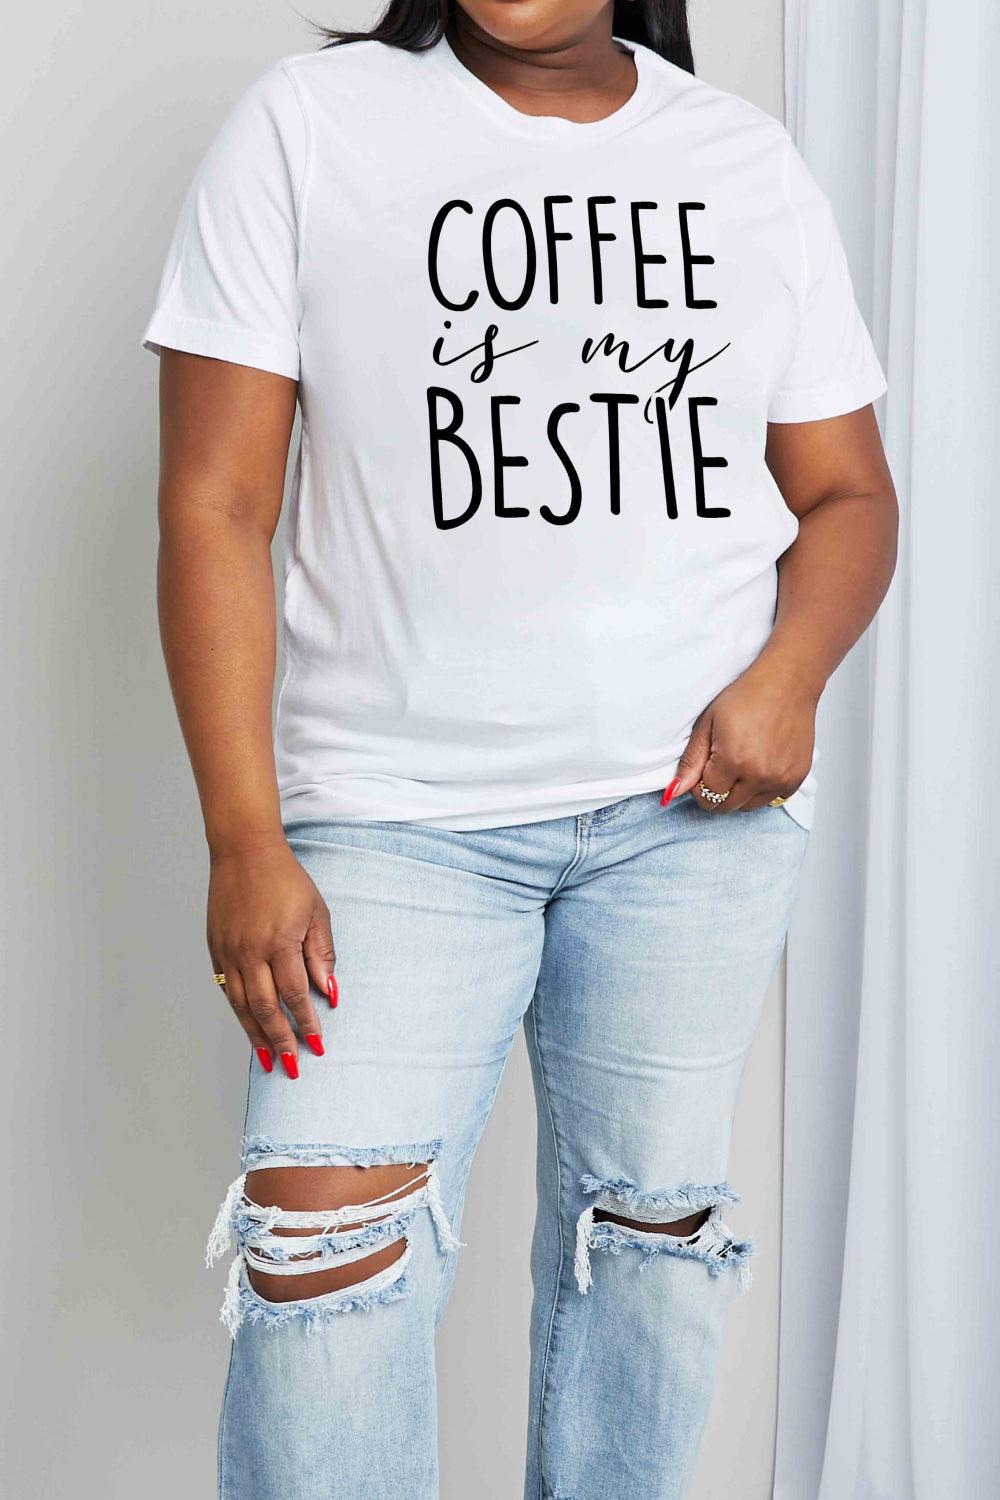 Simply Love Full Size COFFEE IS MY BESTIE Graphic Cotton T-Shirt - Lab Fashion, Home & Health